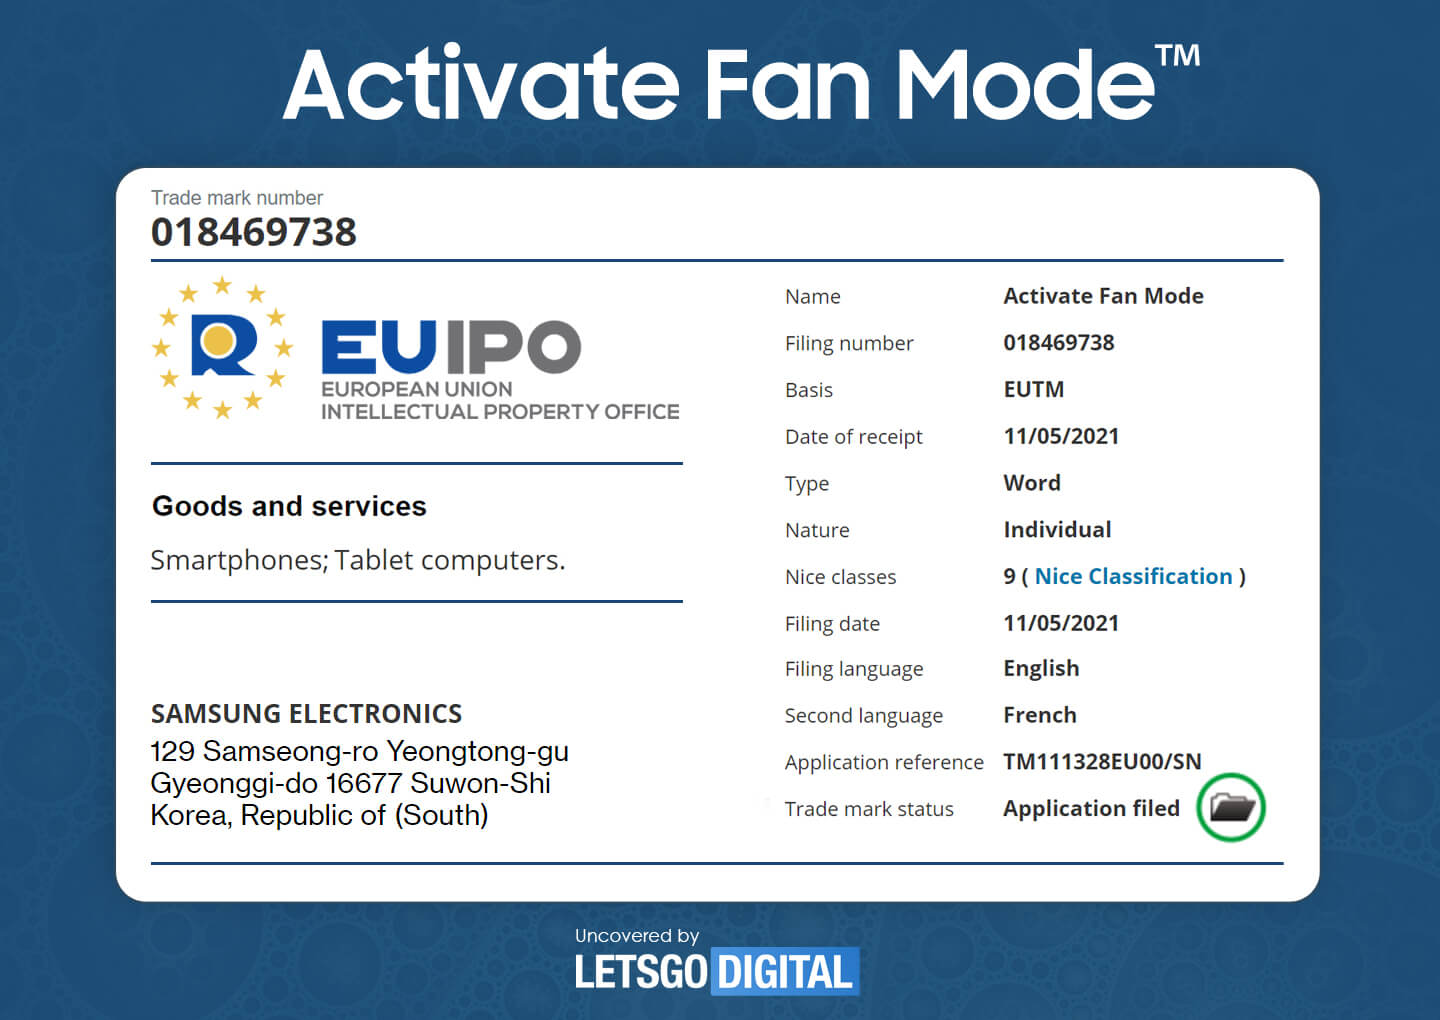 Samsung trademarks Active Fan Mode for smartphones and tablets